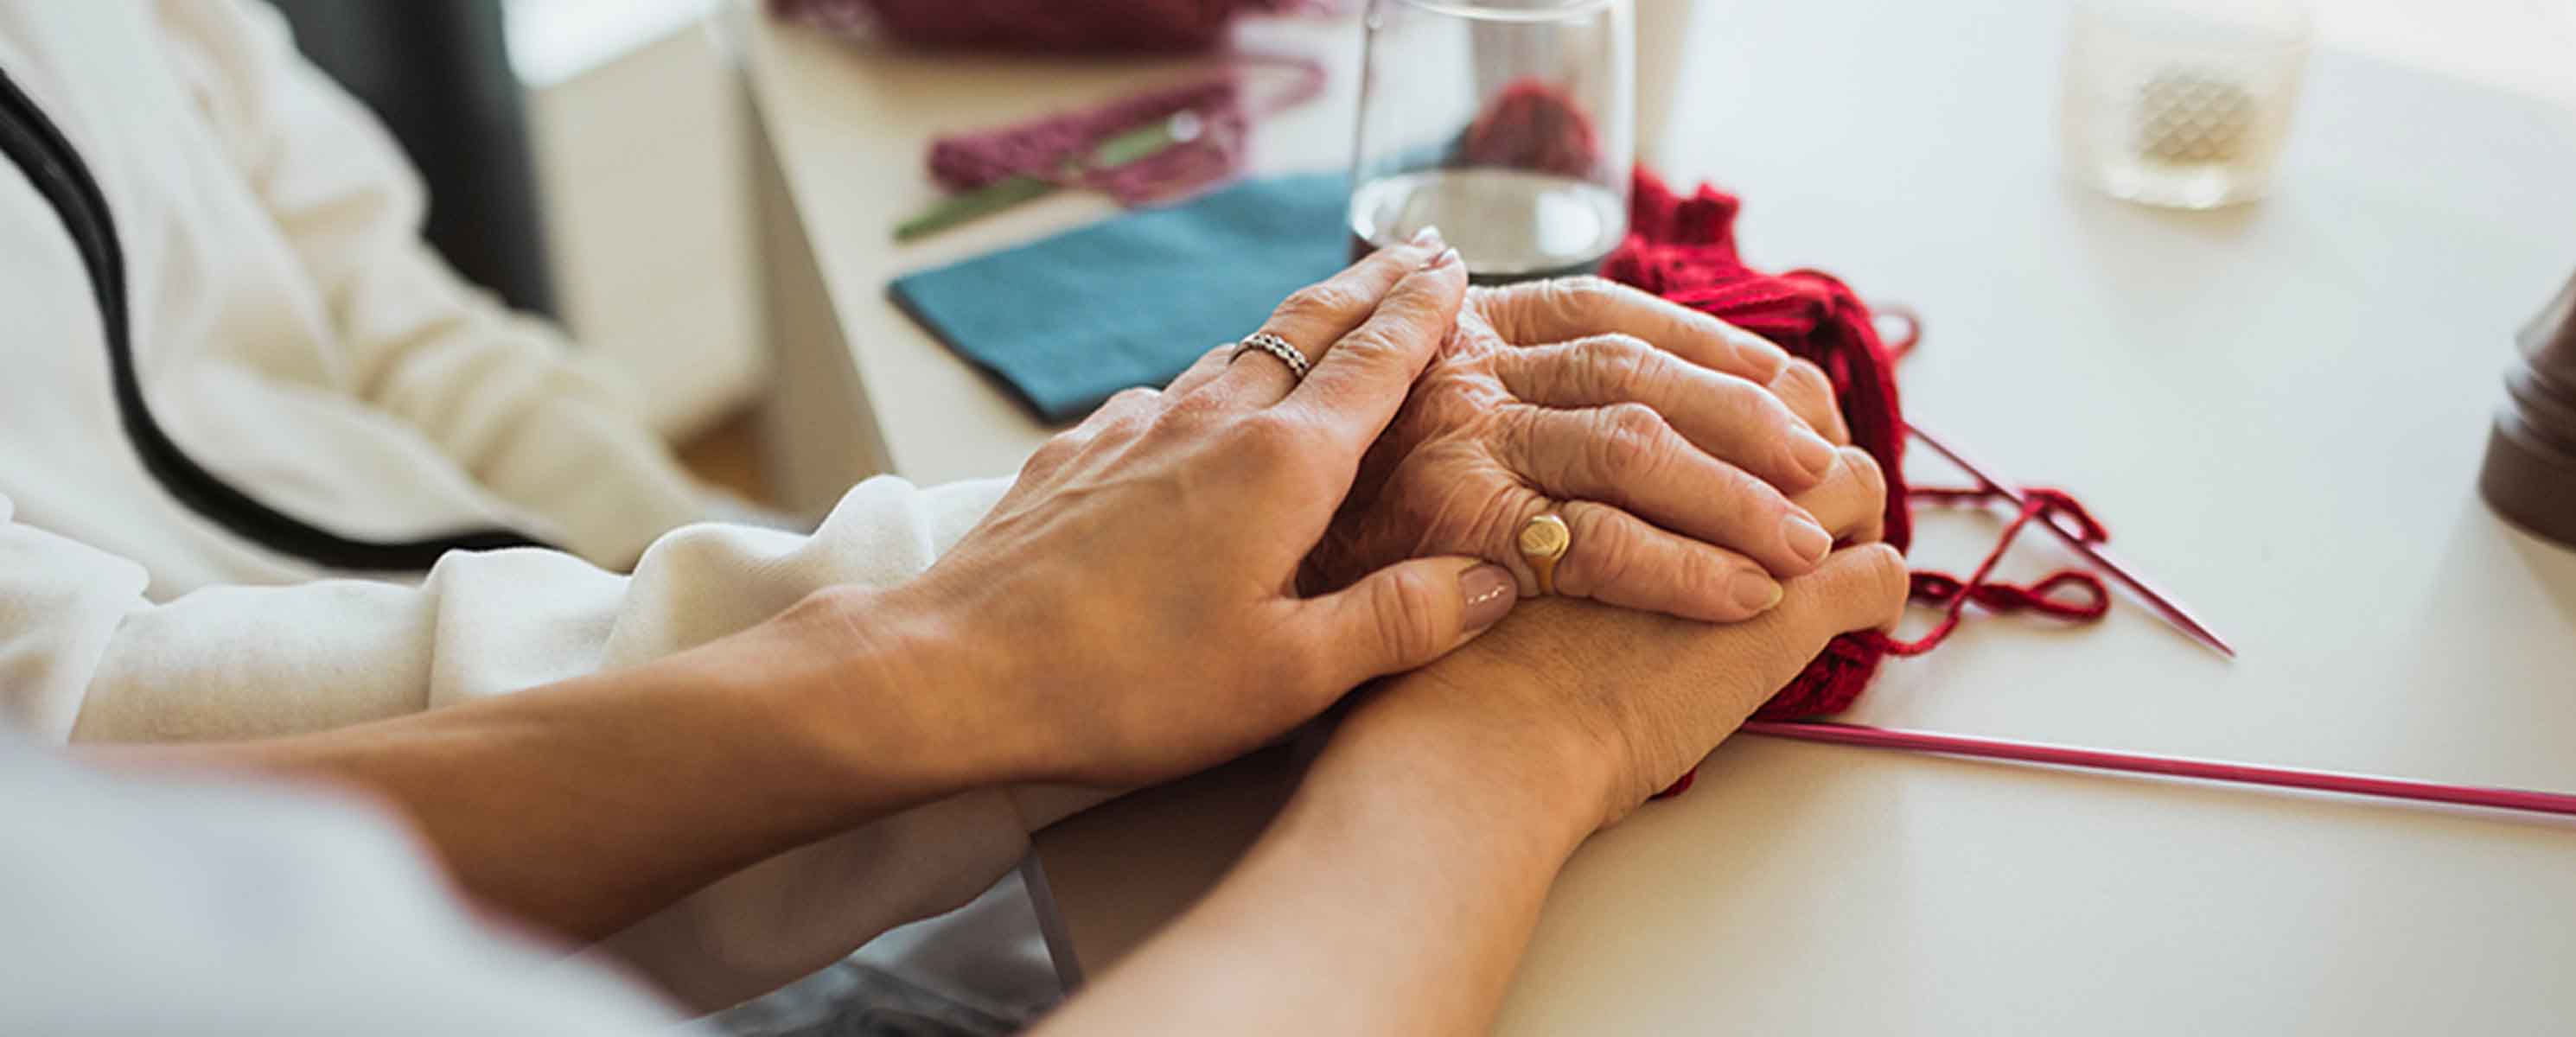 White woman holding hand of older person